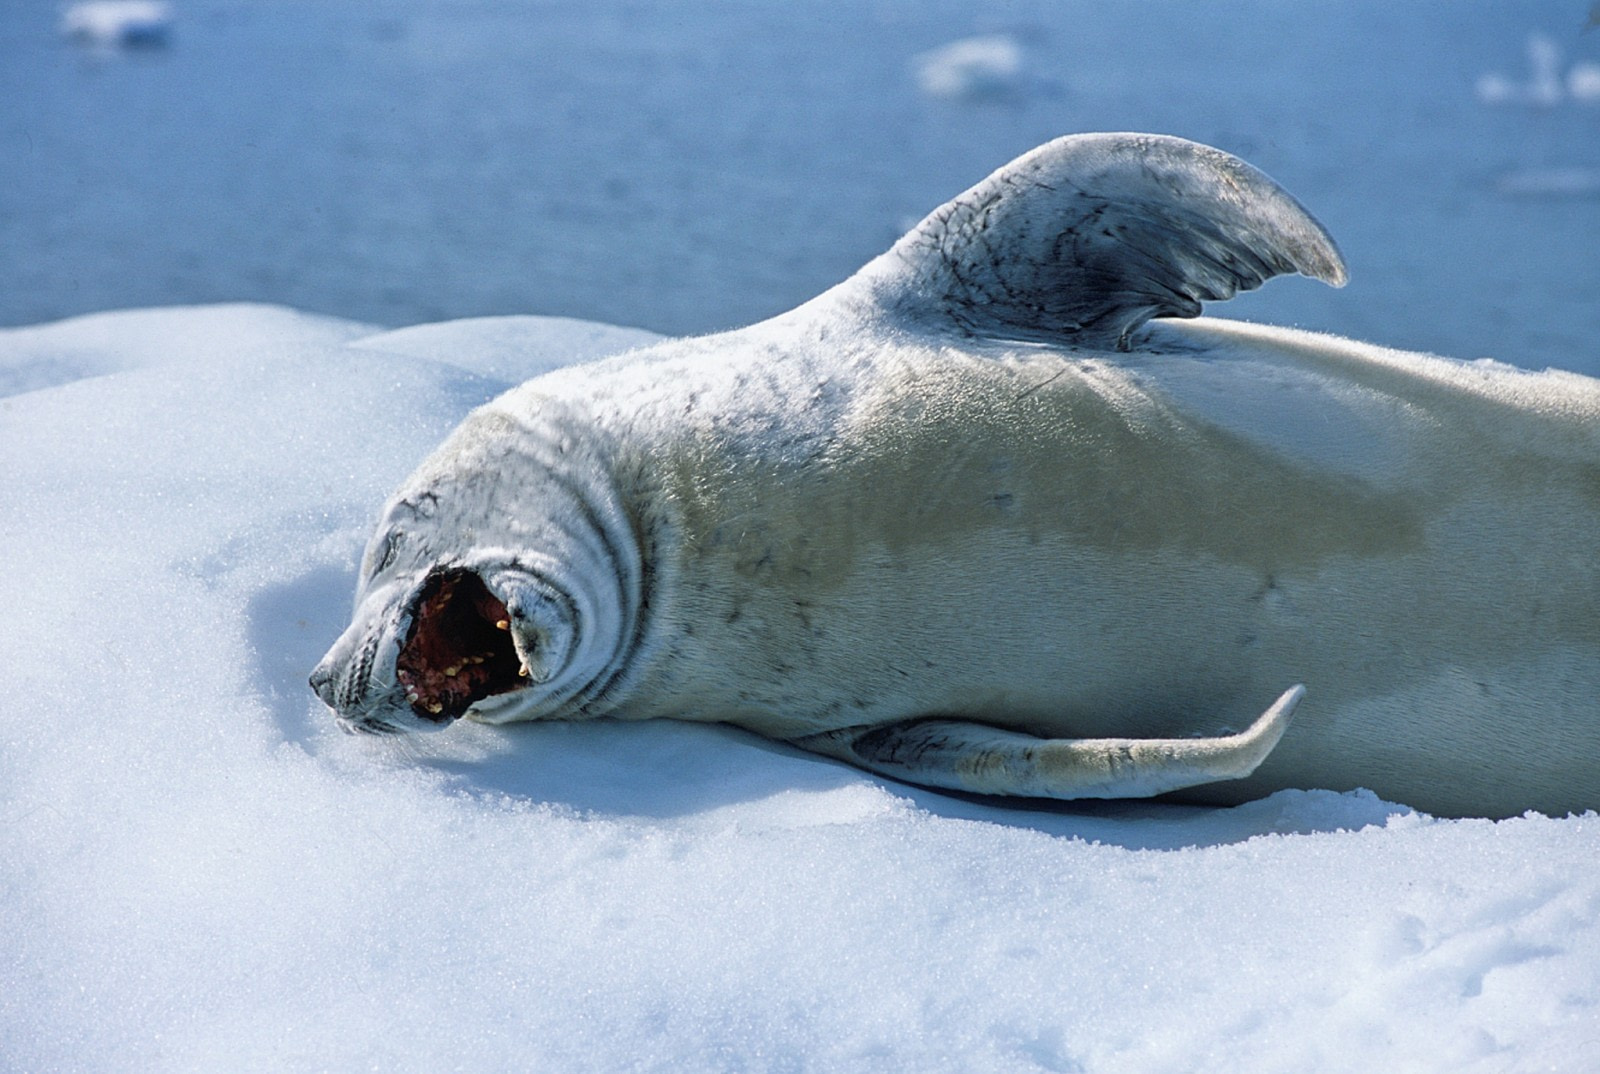 Crabeater Seal making a sound while lying down on the snow ground